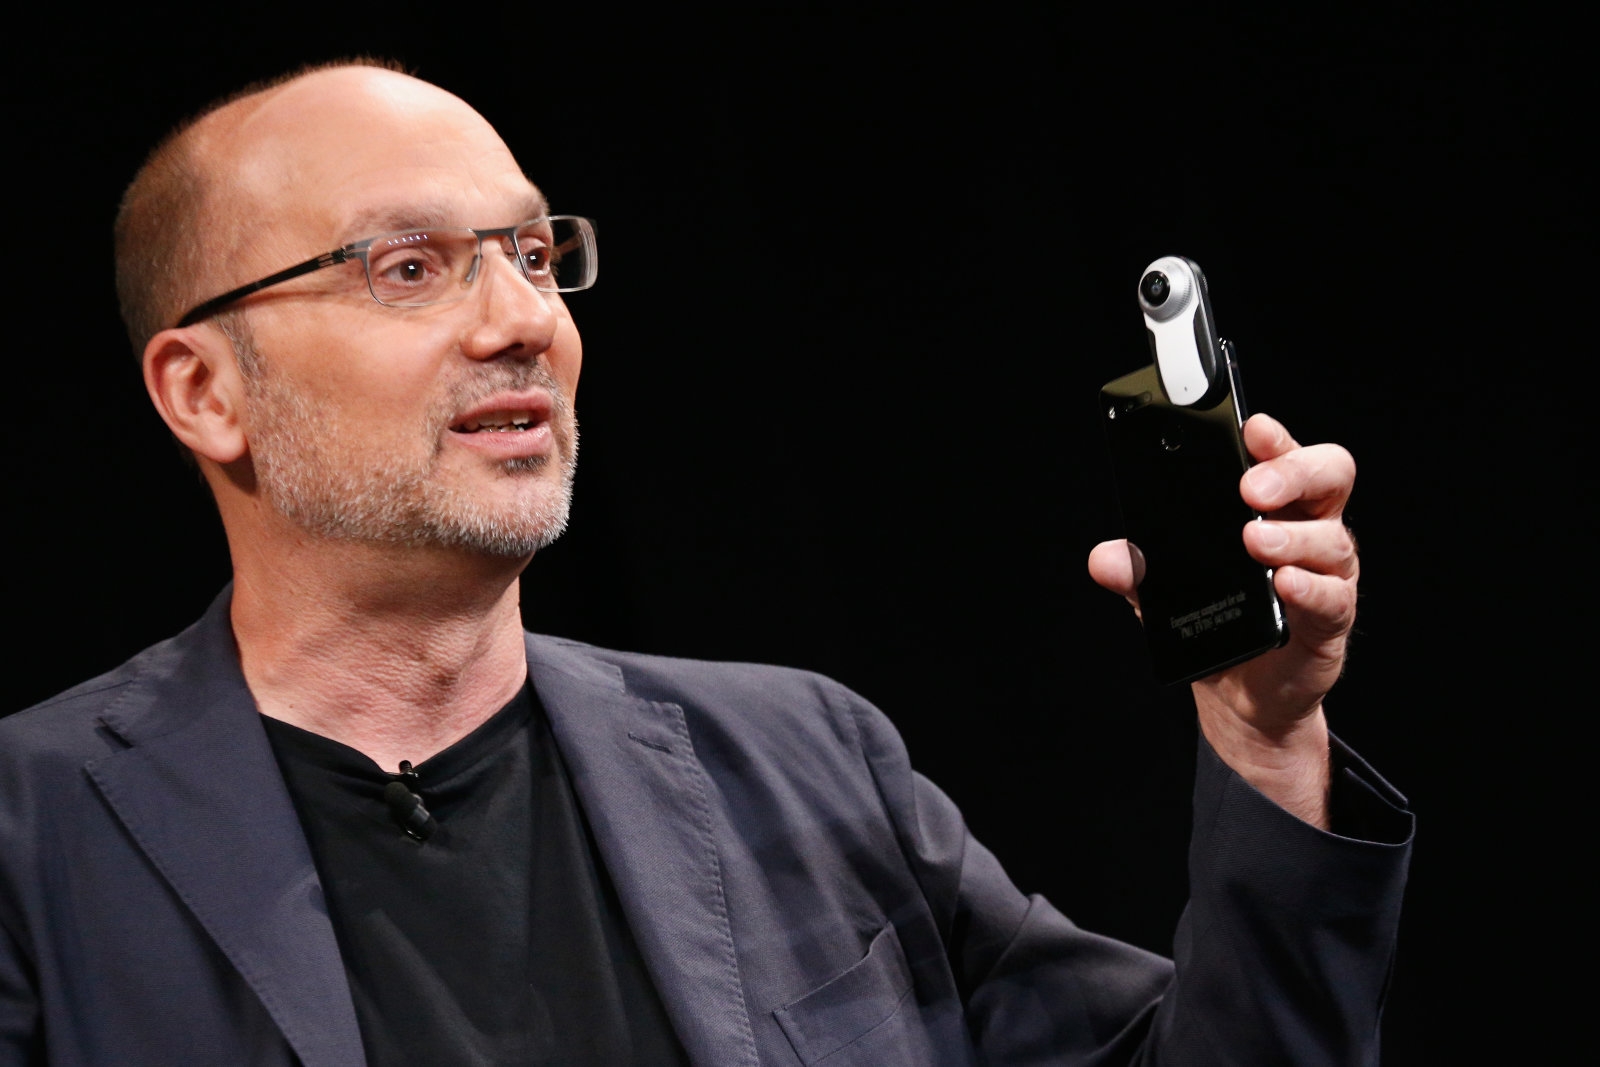 Andy Rubin returns to Essential amid questions over his past | DeviceDaily.com